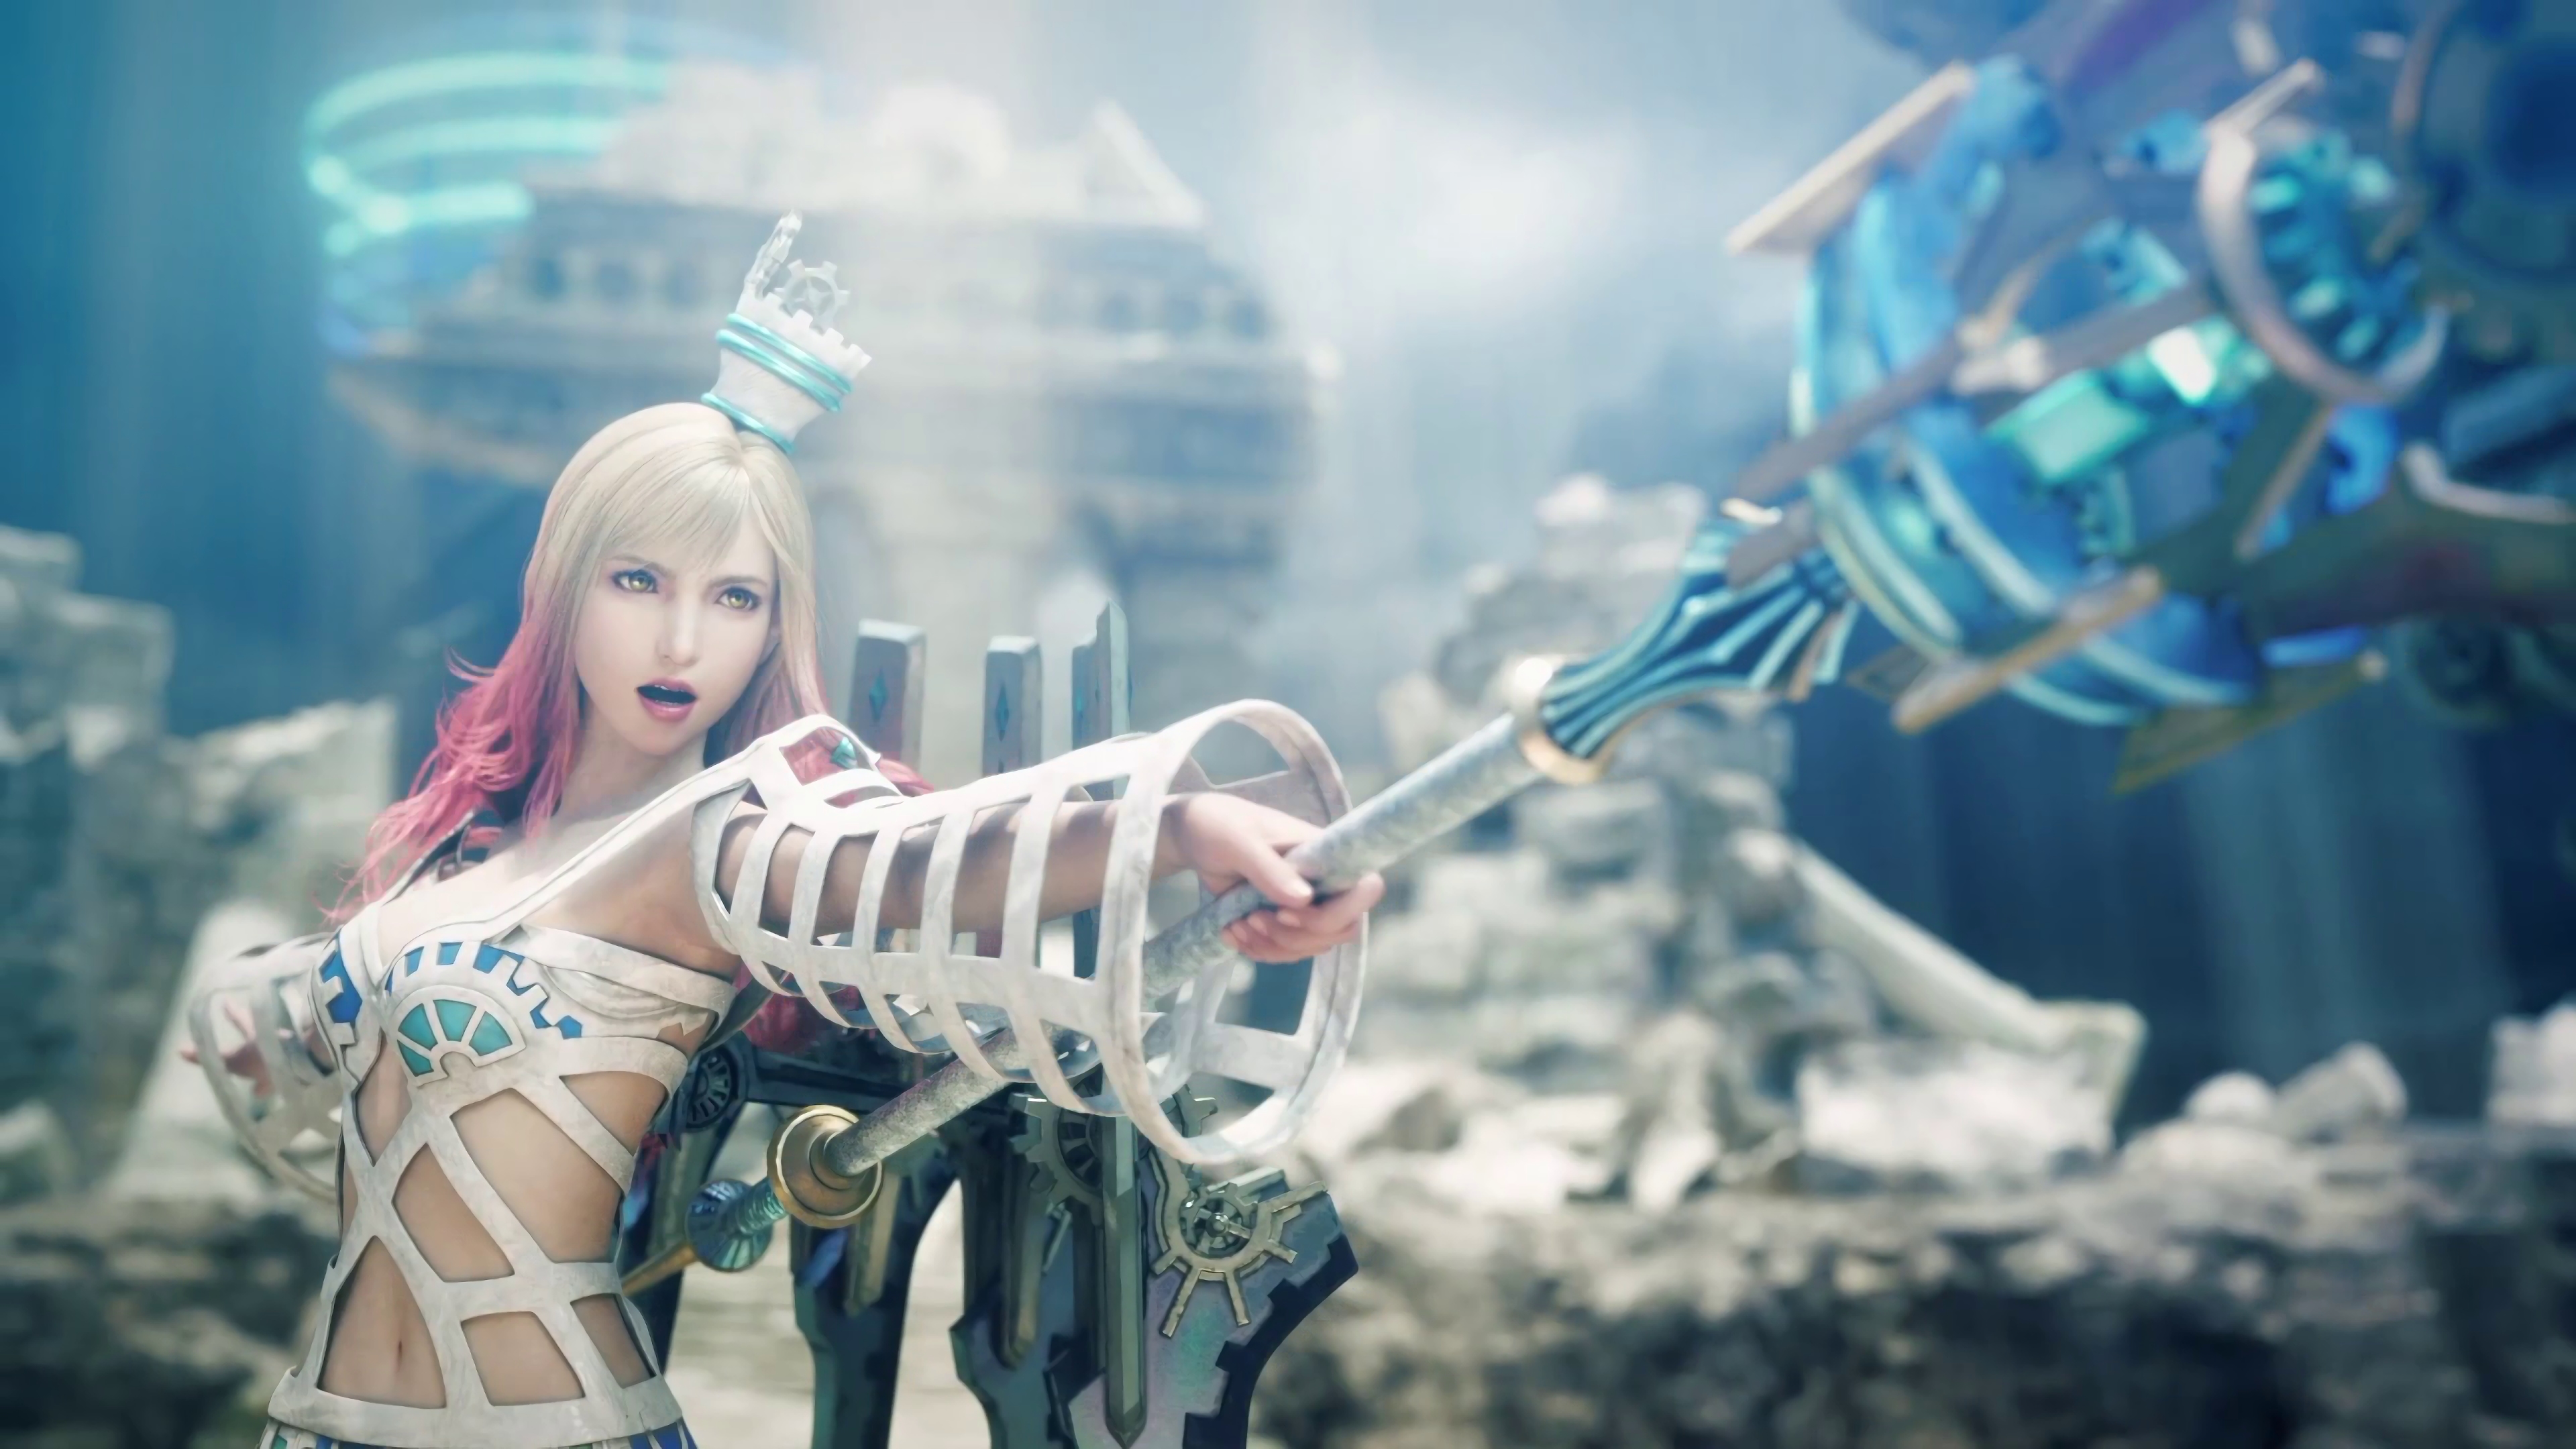 Download 21 final-fantasy-hd Final-Fantasy-HD-4K-Wallpapers-for-Android-APK-Download.jpg